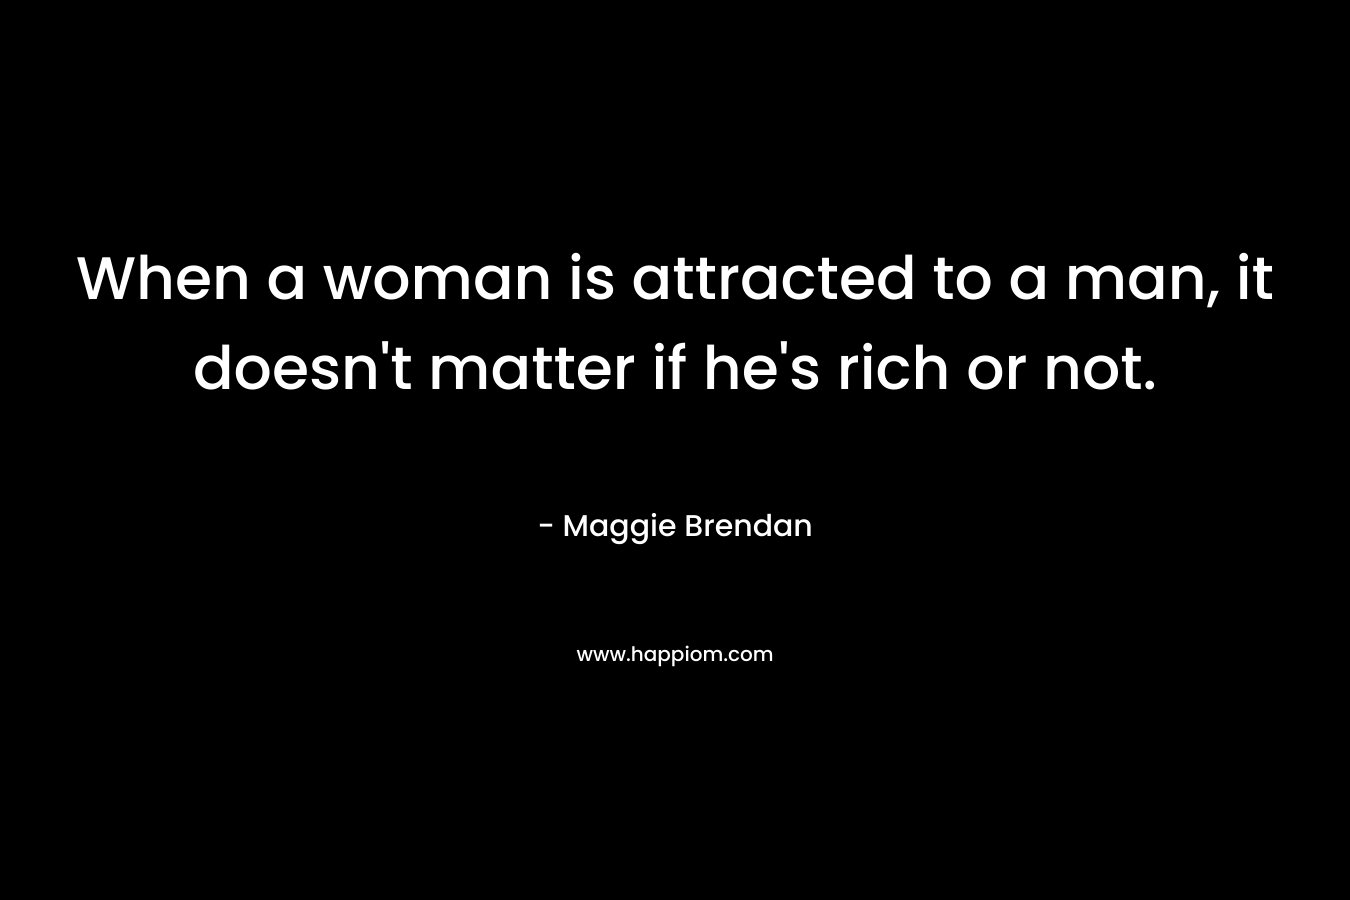 When a woman is attracted to a man, it doesn't matter if he's rich or not.